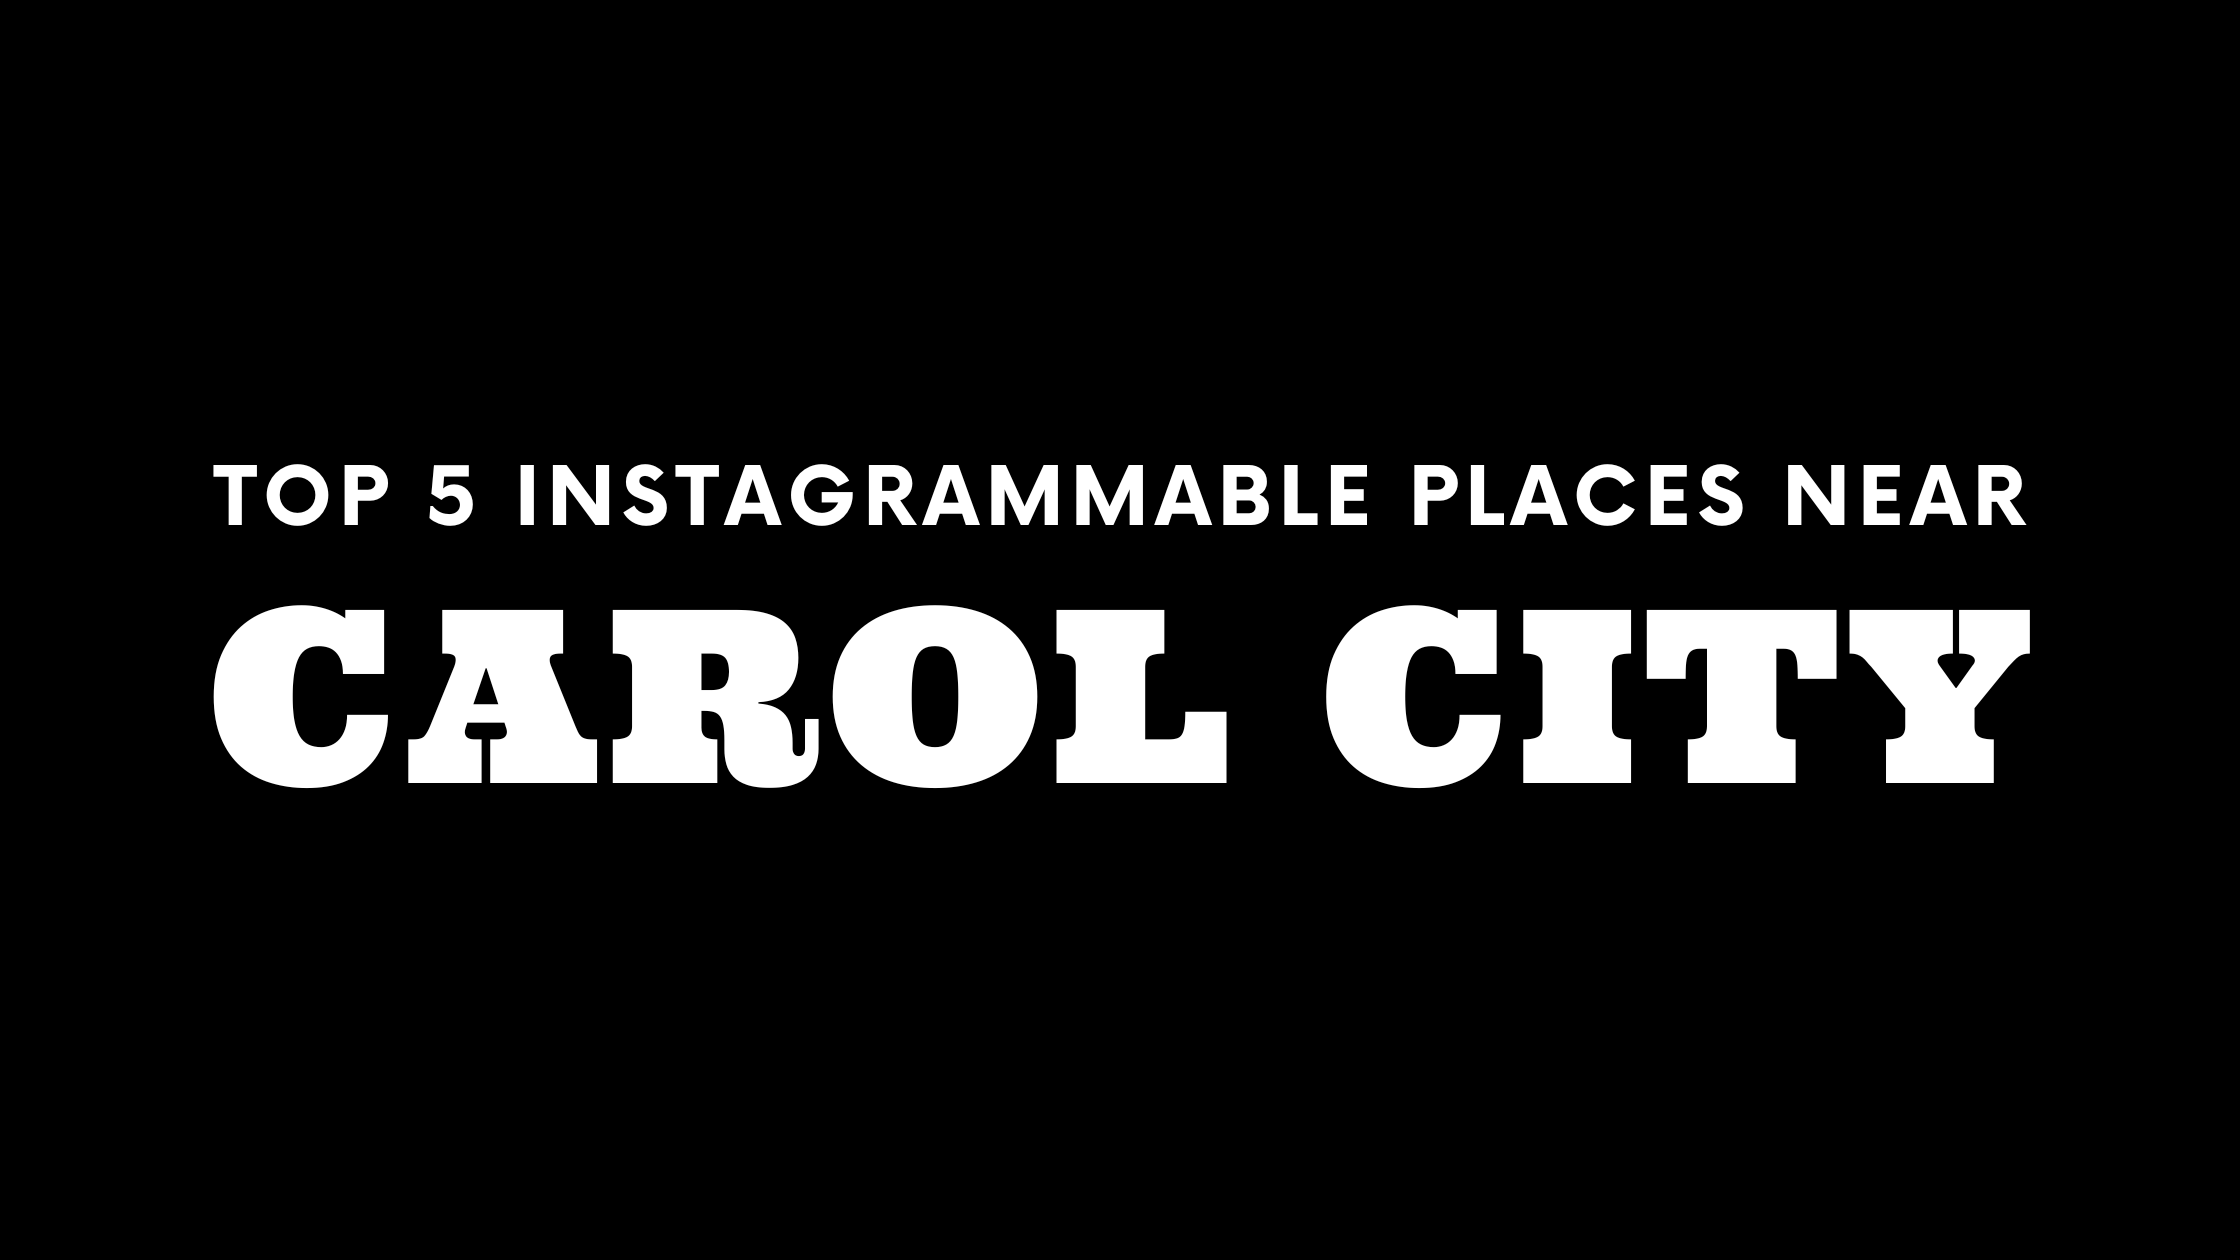 Top 5 Instagrammable Places near Carol City